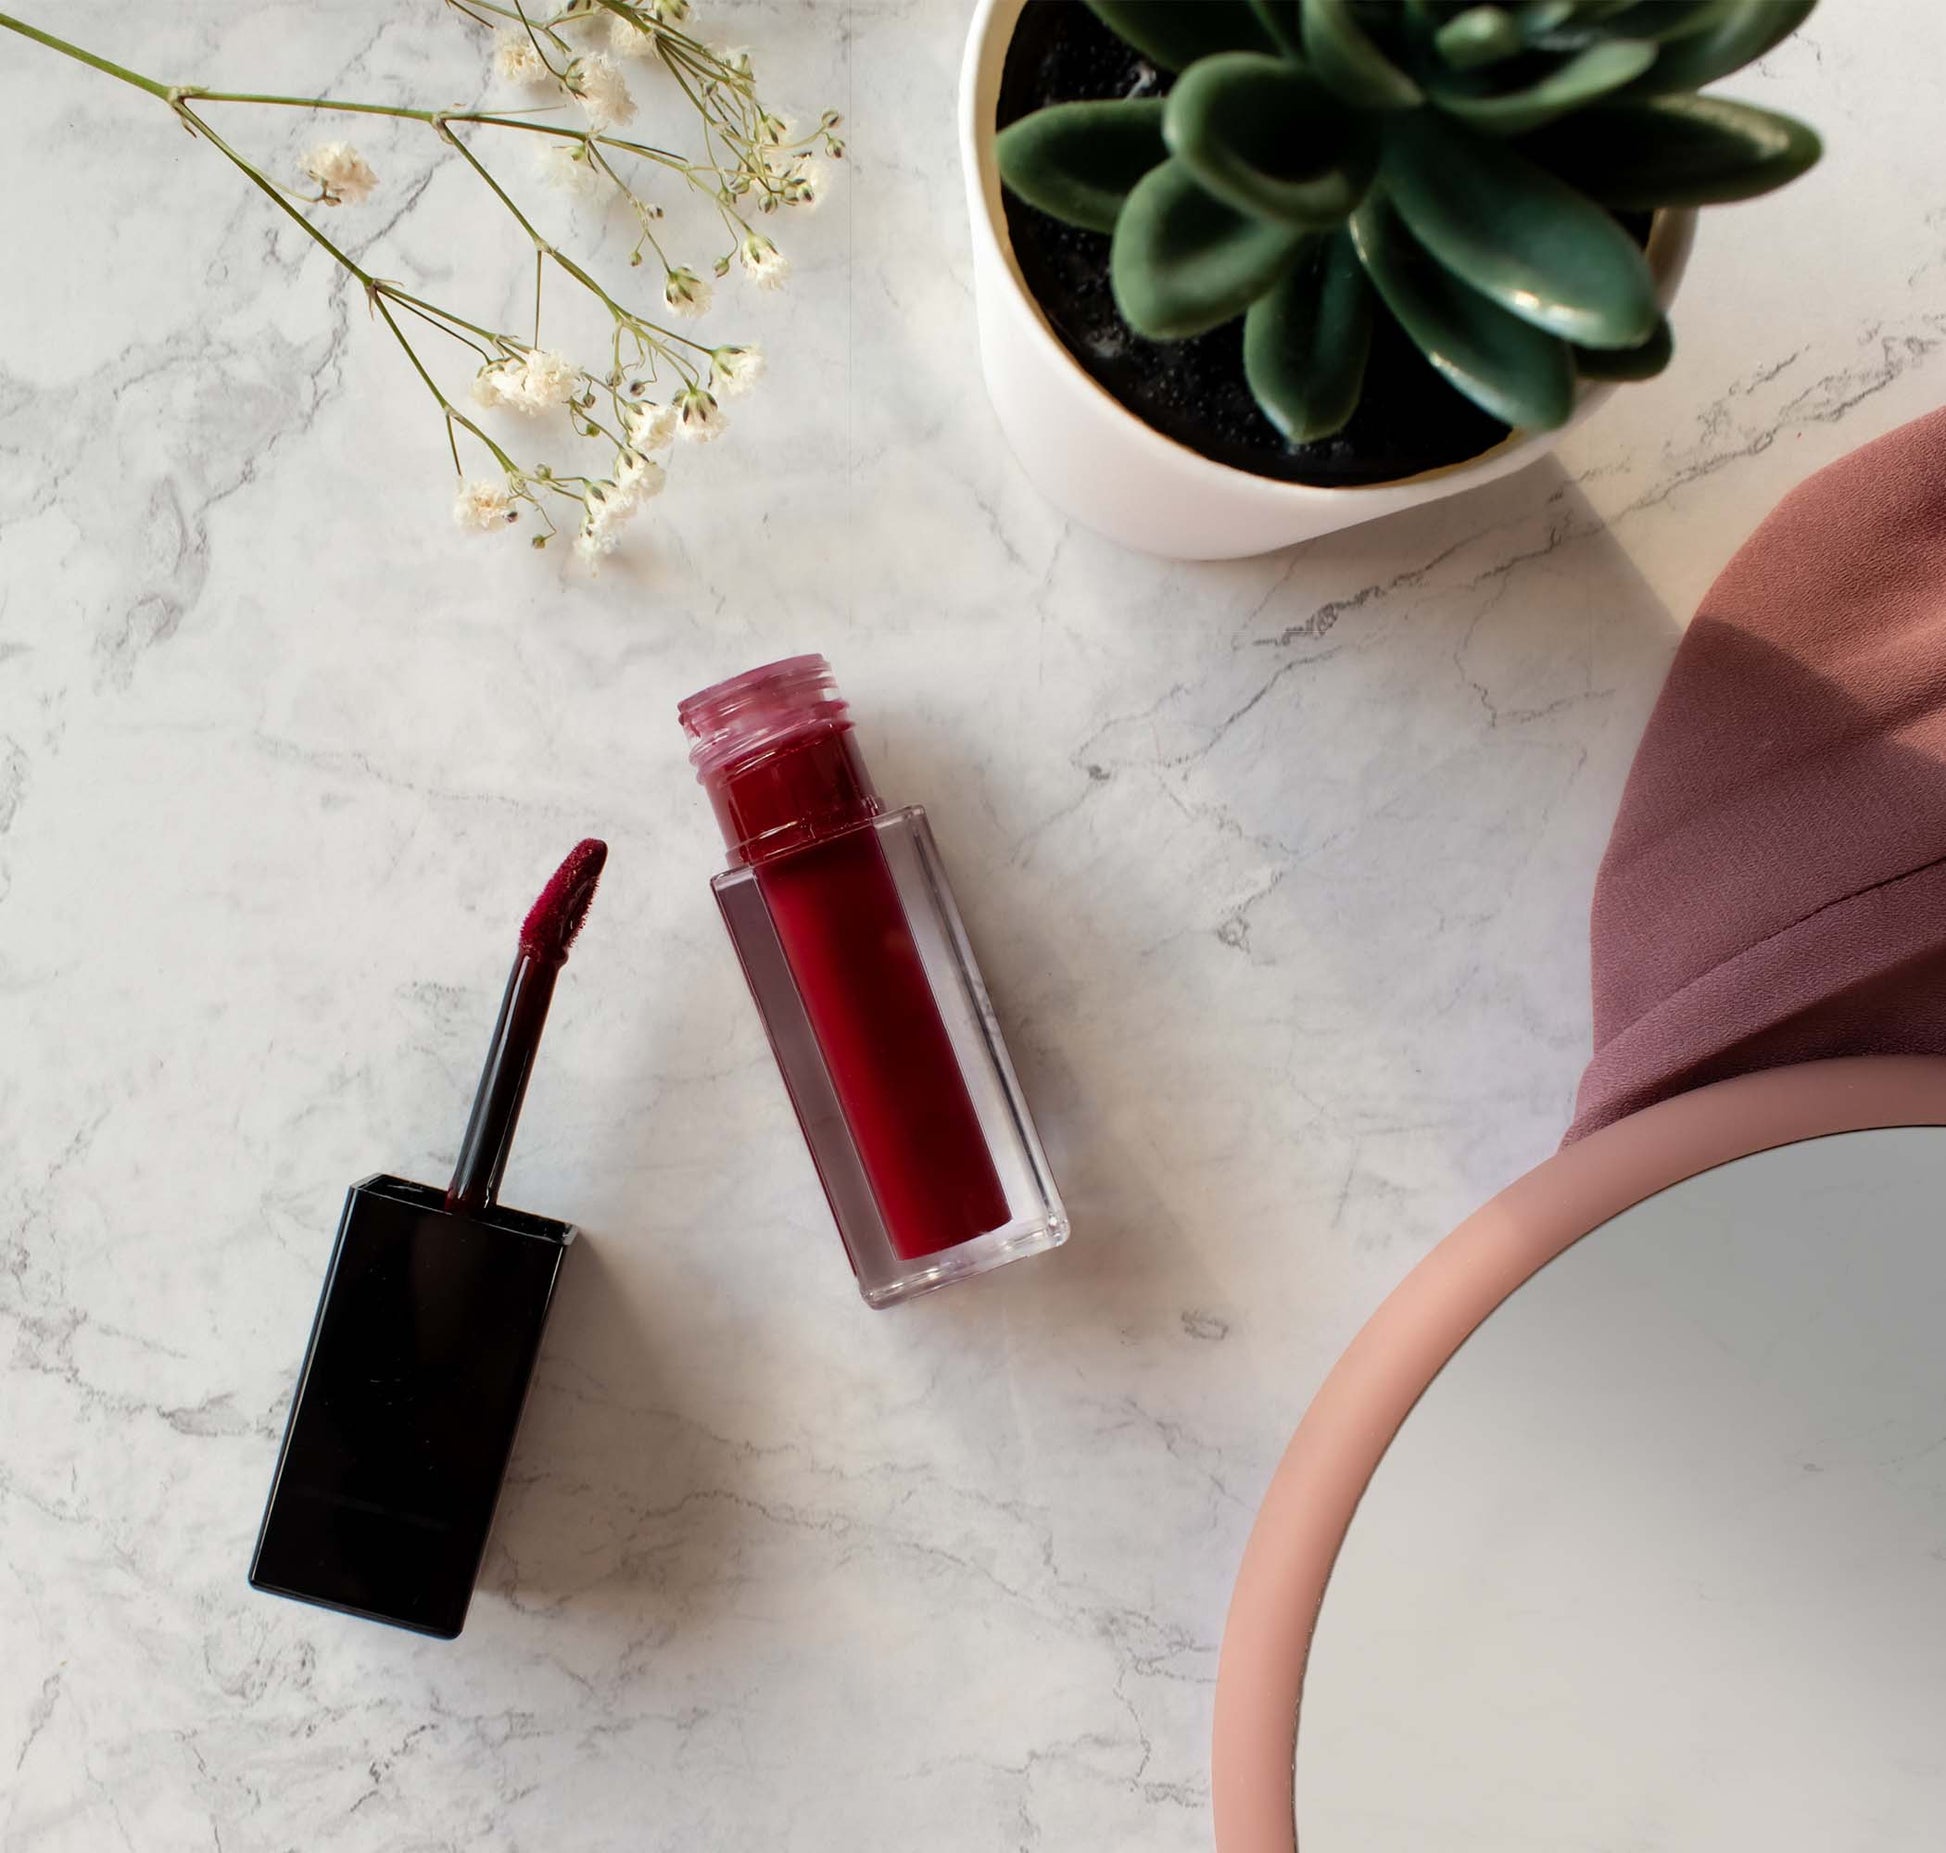 Blackberry Wine Matte Lip Stain by Cruisin Organics is the perfect choice for a long-lasting, bold look. Our formula is enriched with vitamin E and offers a silky matte finish for precision application and intense color.